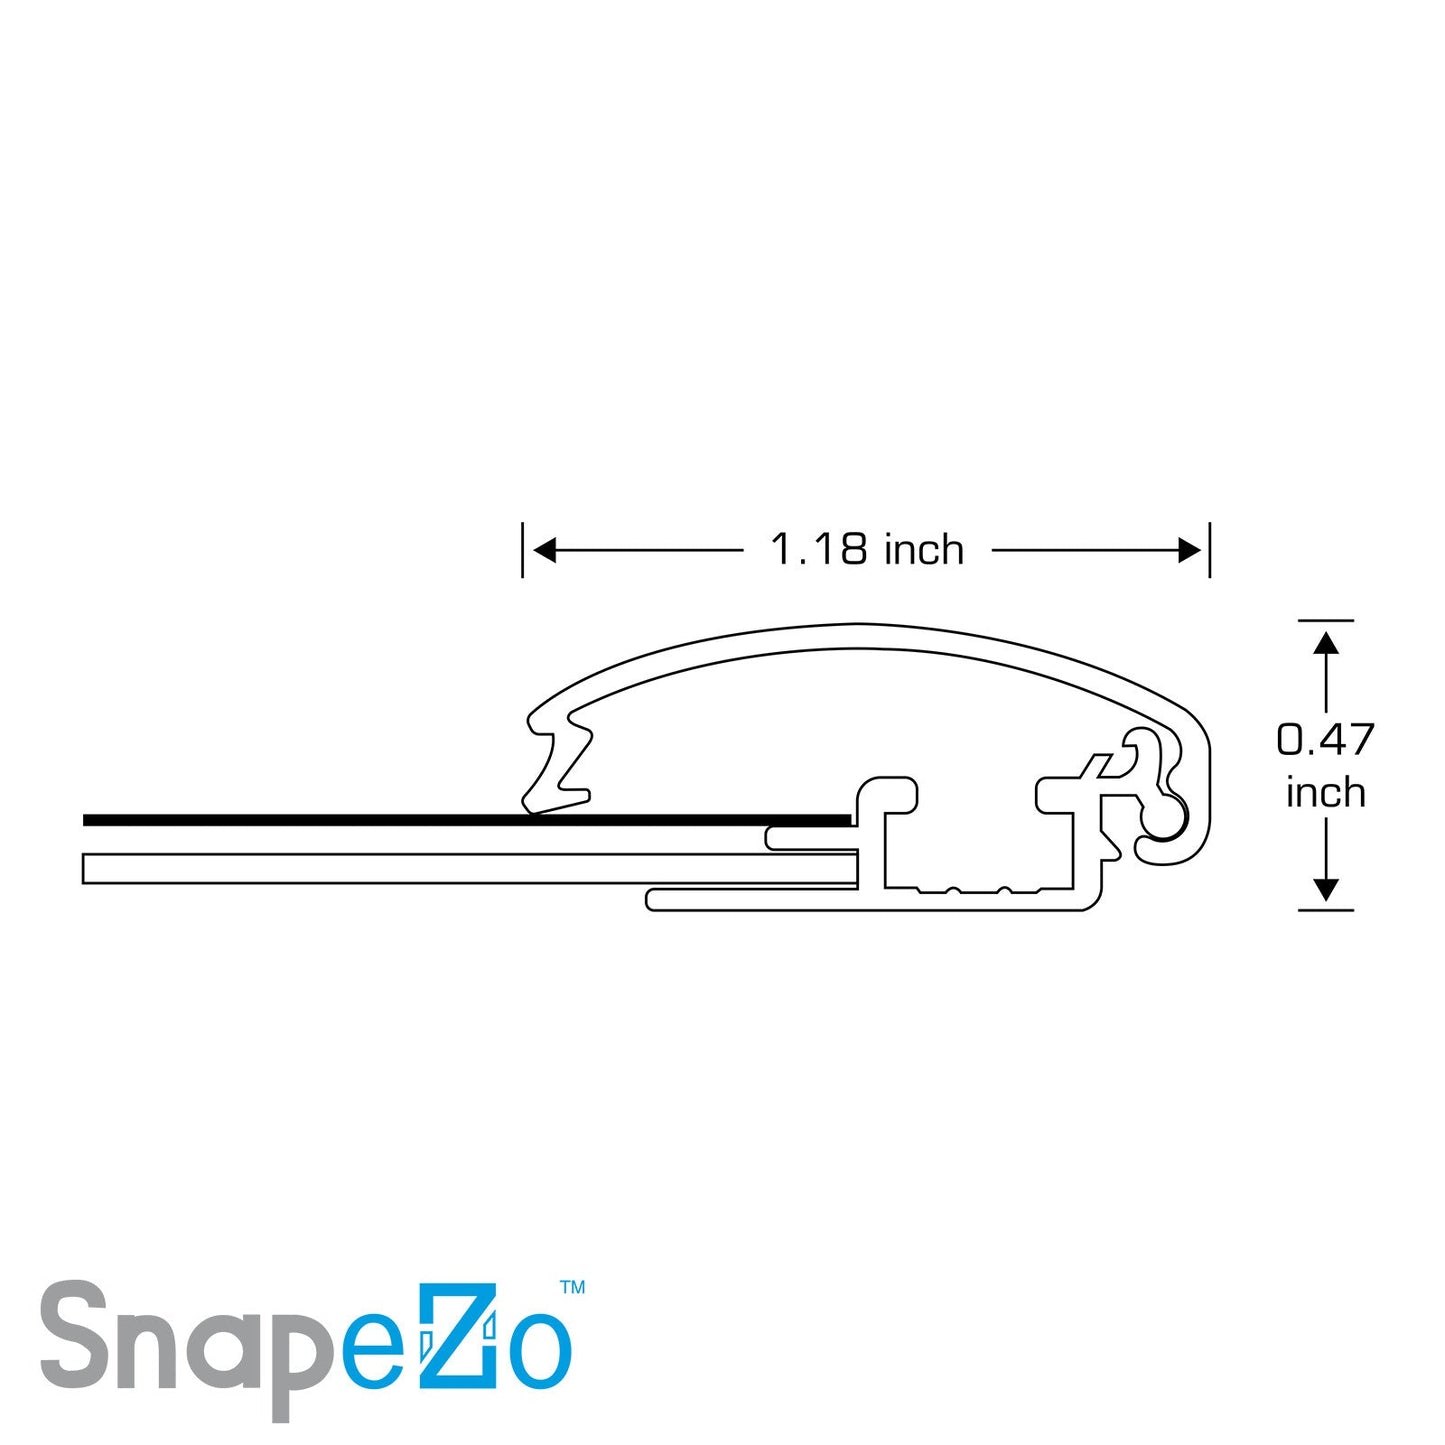 Load image into Gallery viewer, 30x36 Silver SnapeZo® Snap Frame - 1.2&amp;quot; Profile
